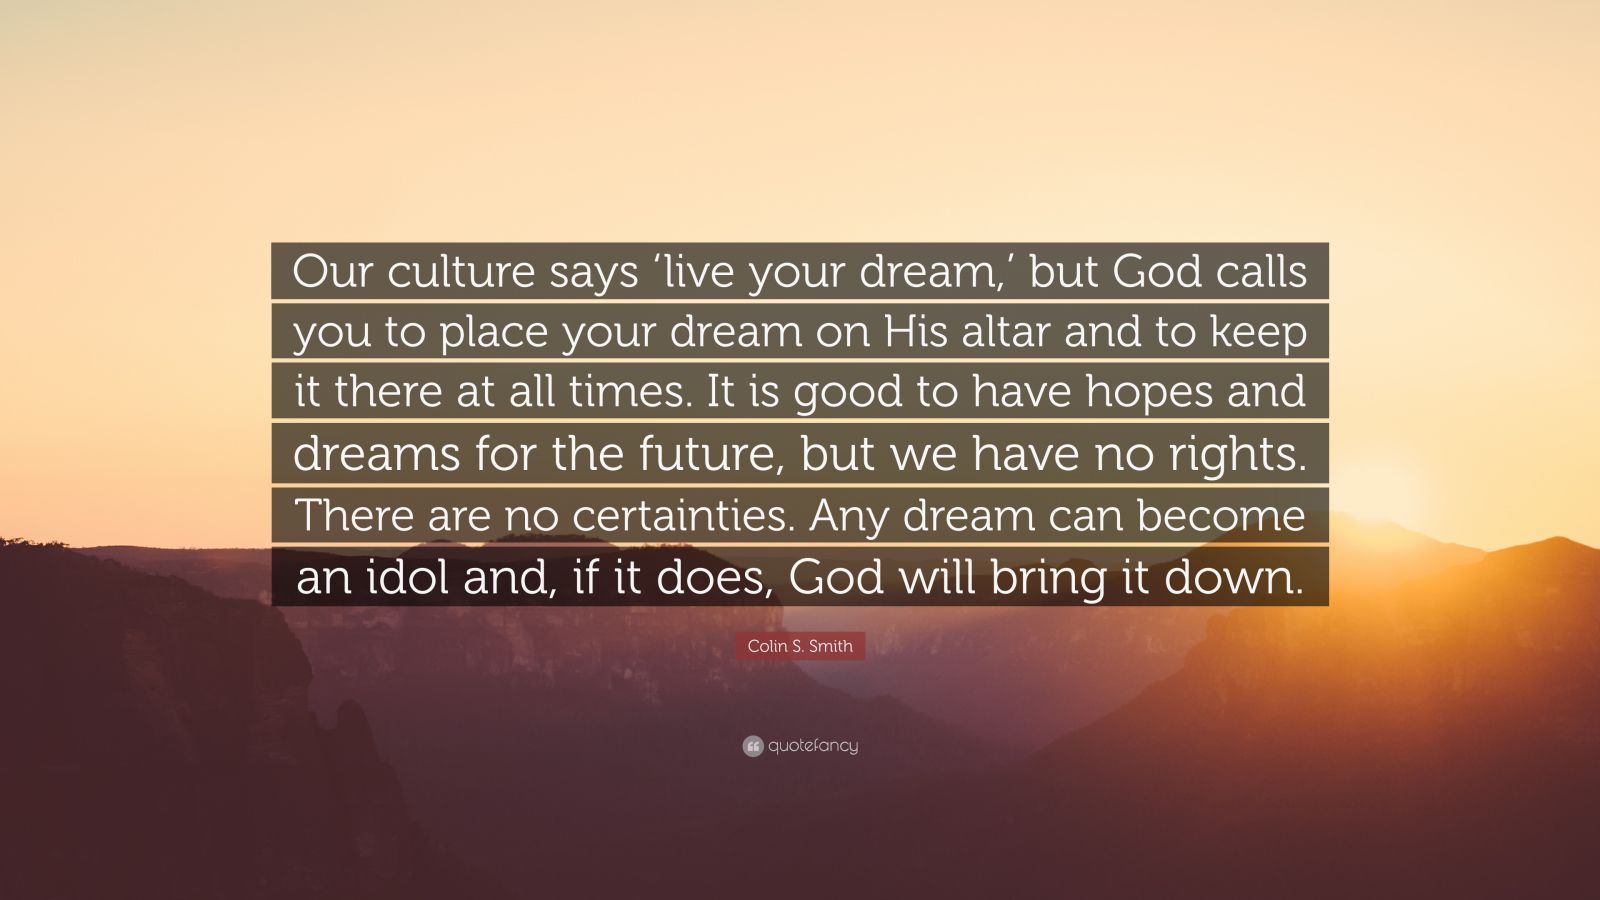 Colin S. Smith Quote: “Our culture says 'live your dream,' but God